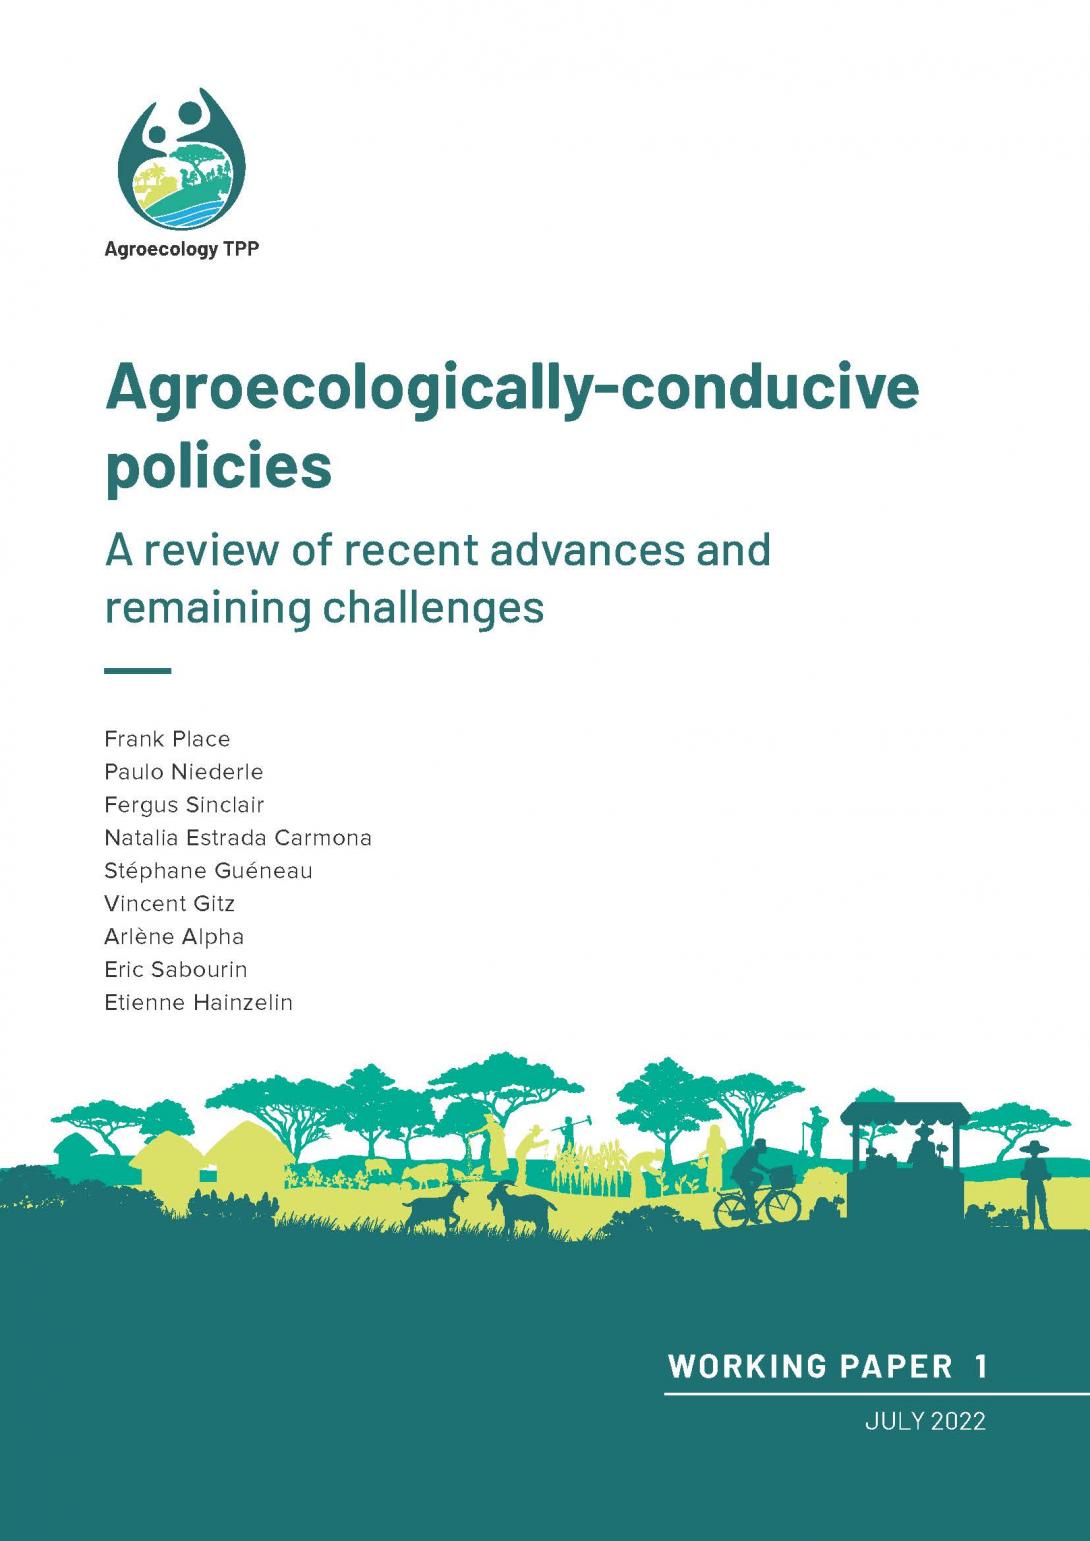 Agroecologically-conducive policies: A review of recent advances and remaining challenges